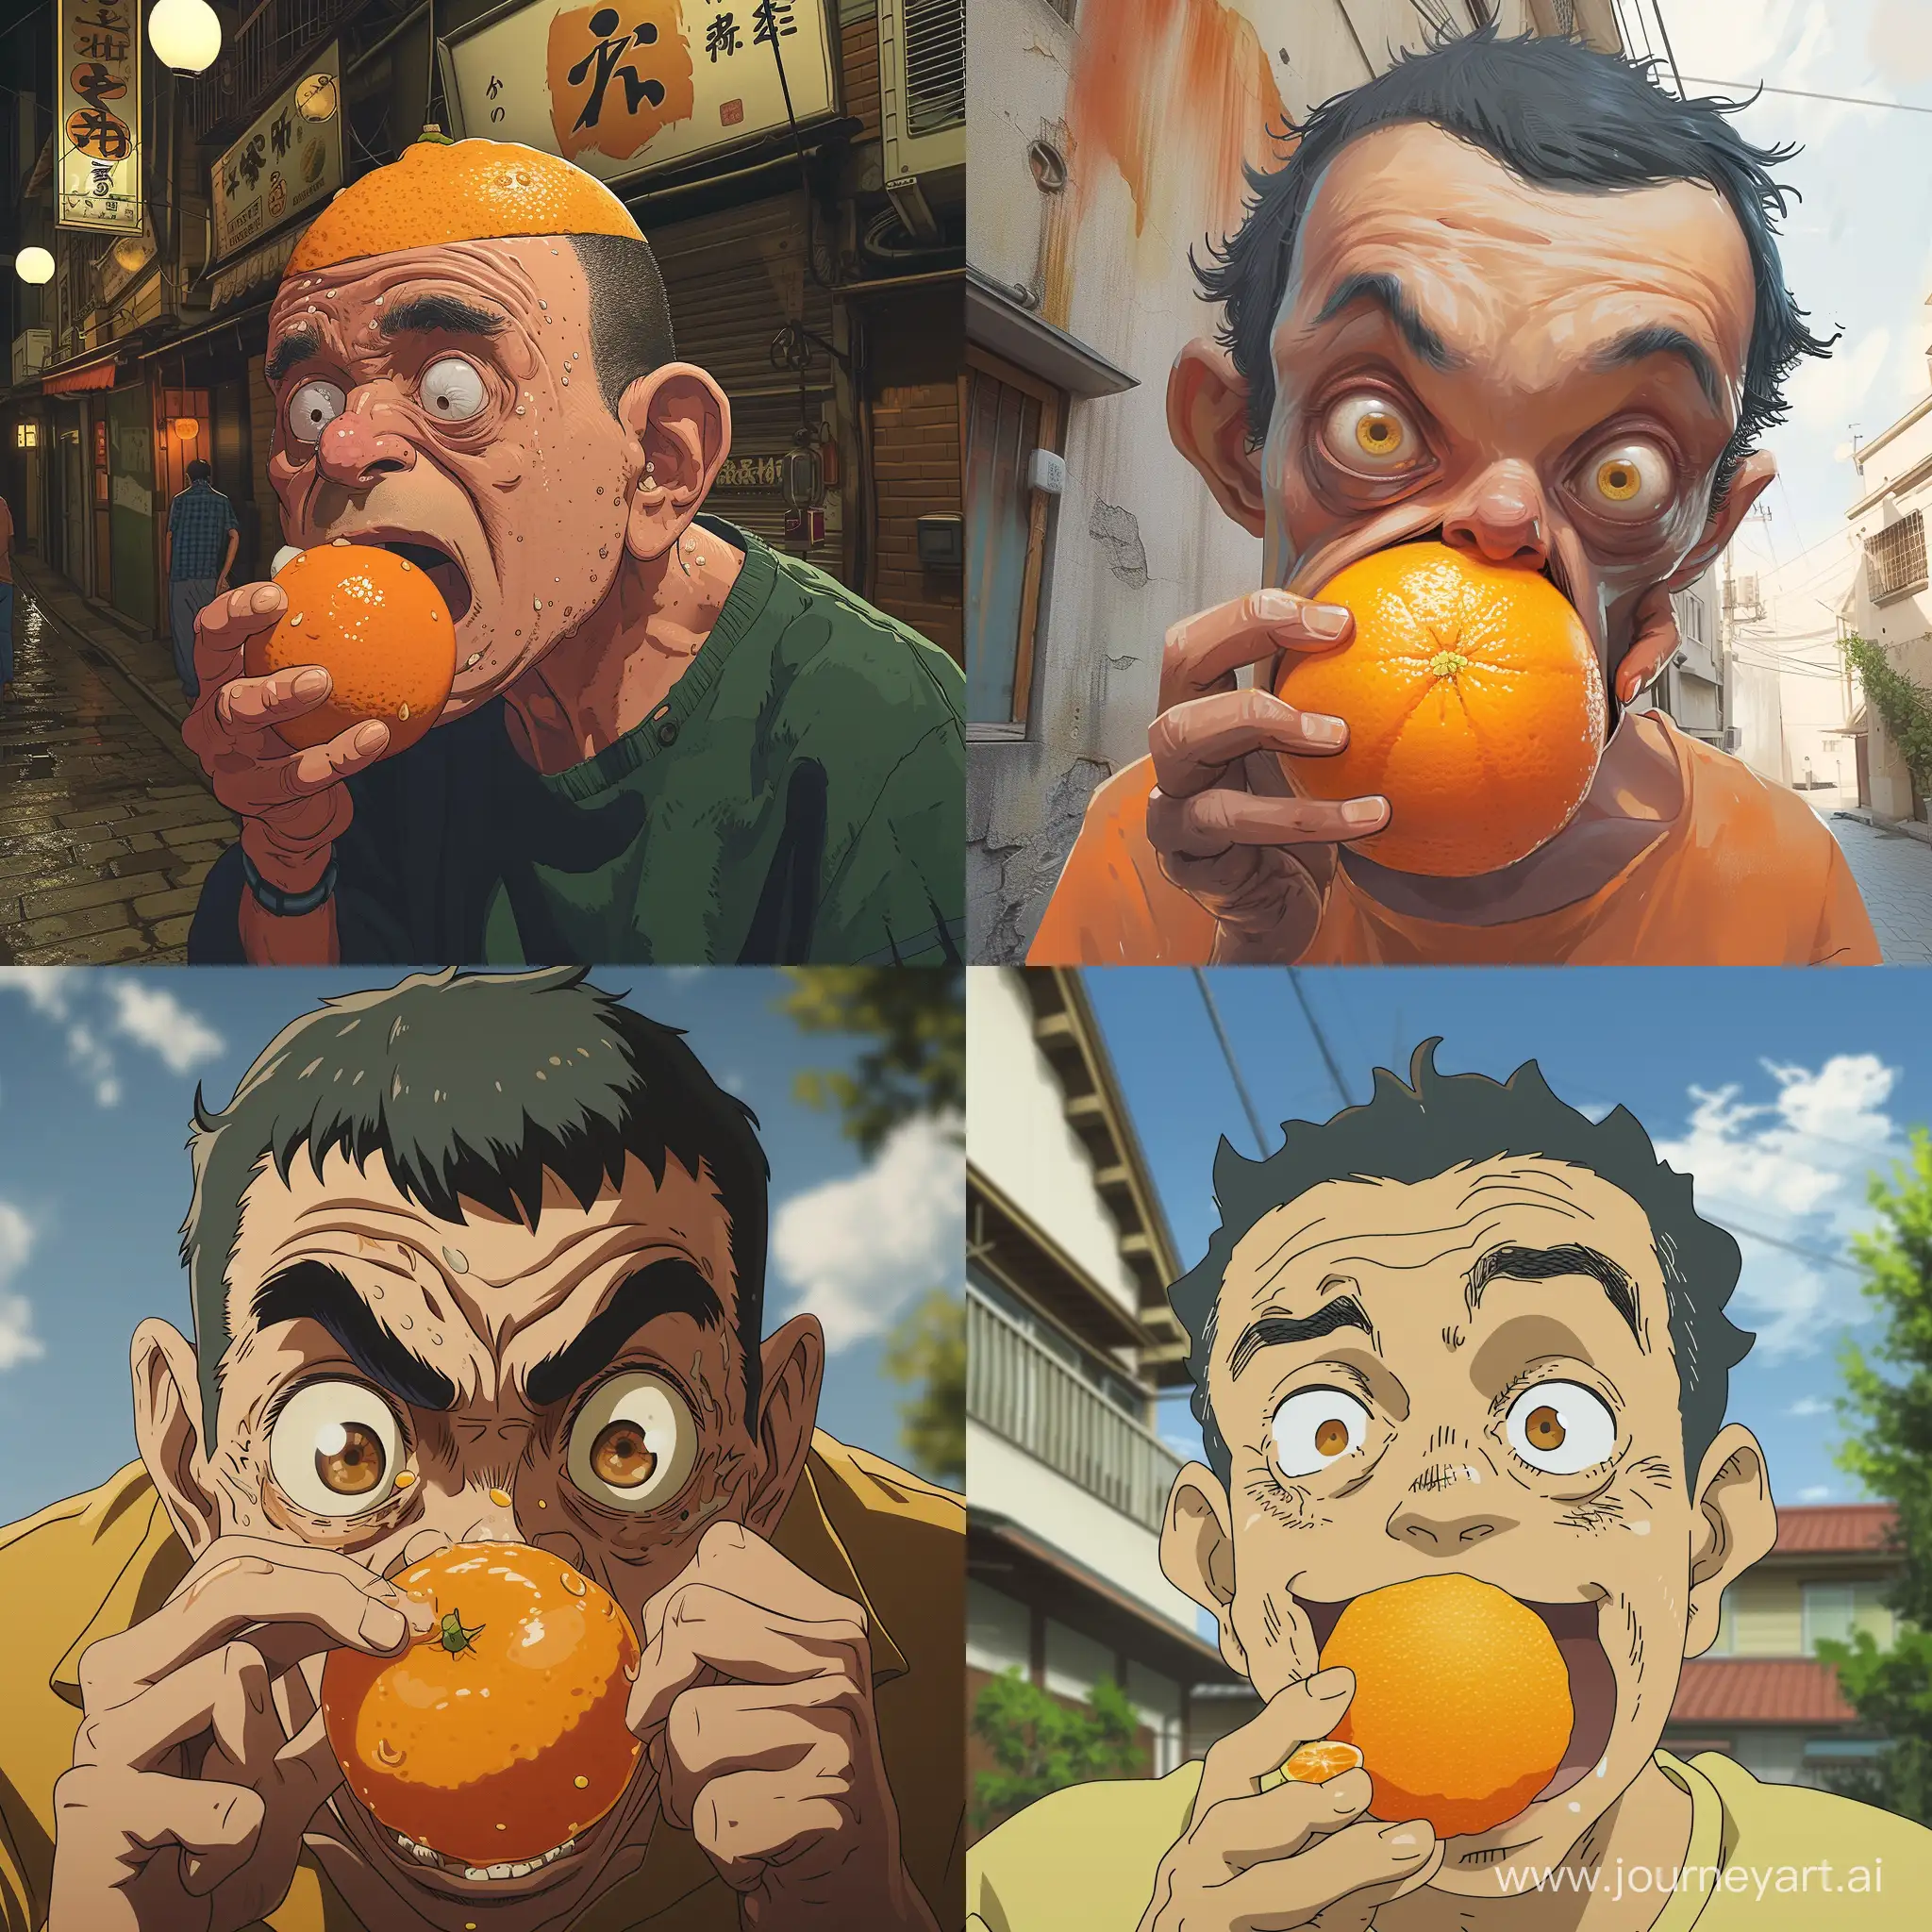 bulgarian man with a comically large forehead eating an orange, anime